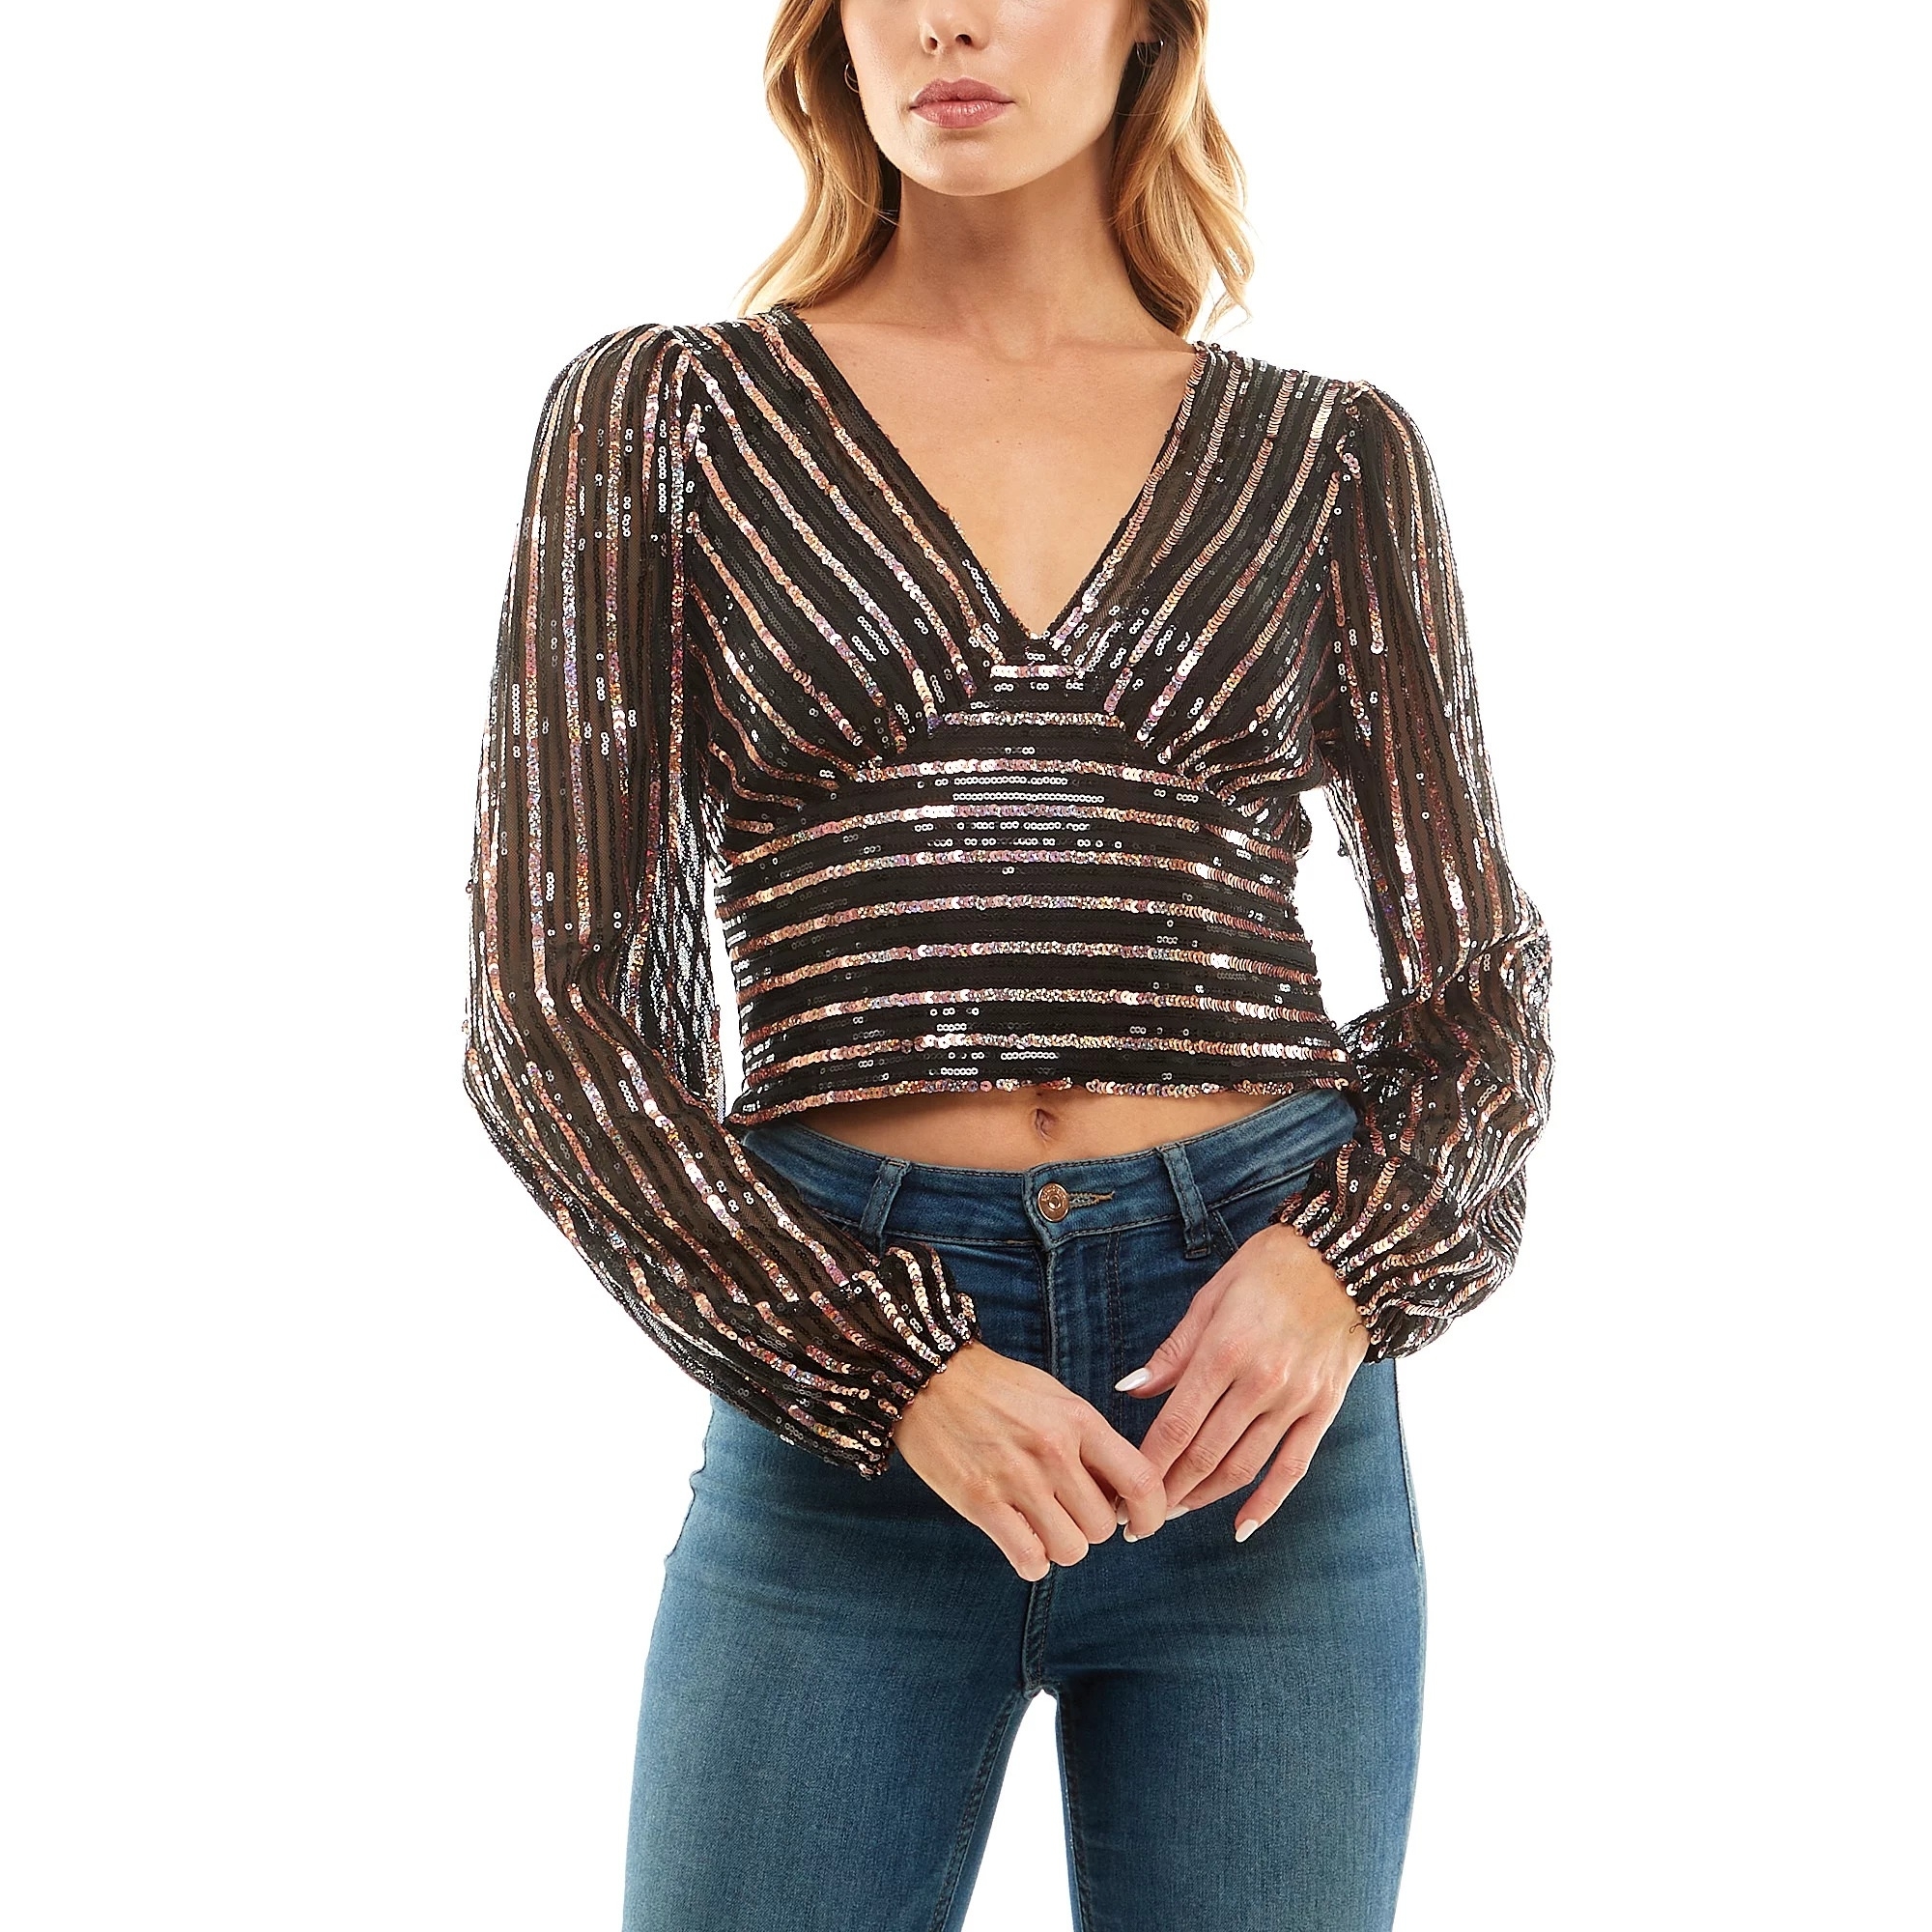 A model wearing the long sleeve V-neck top in a striped sequined design